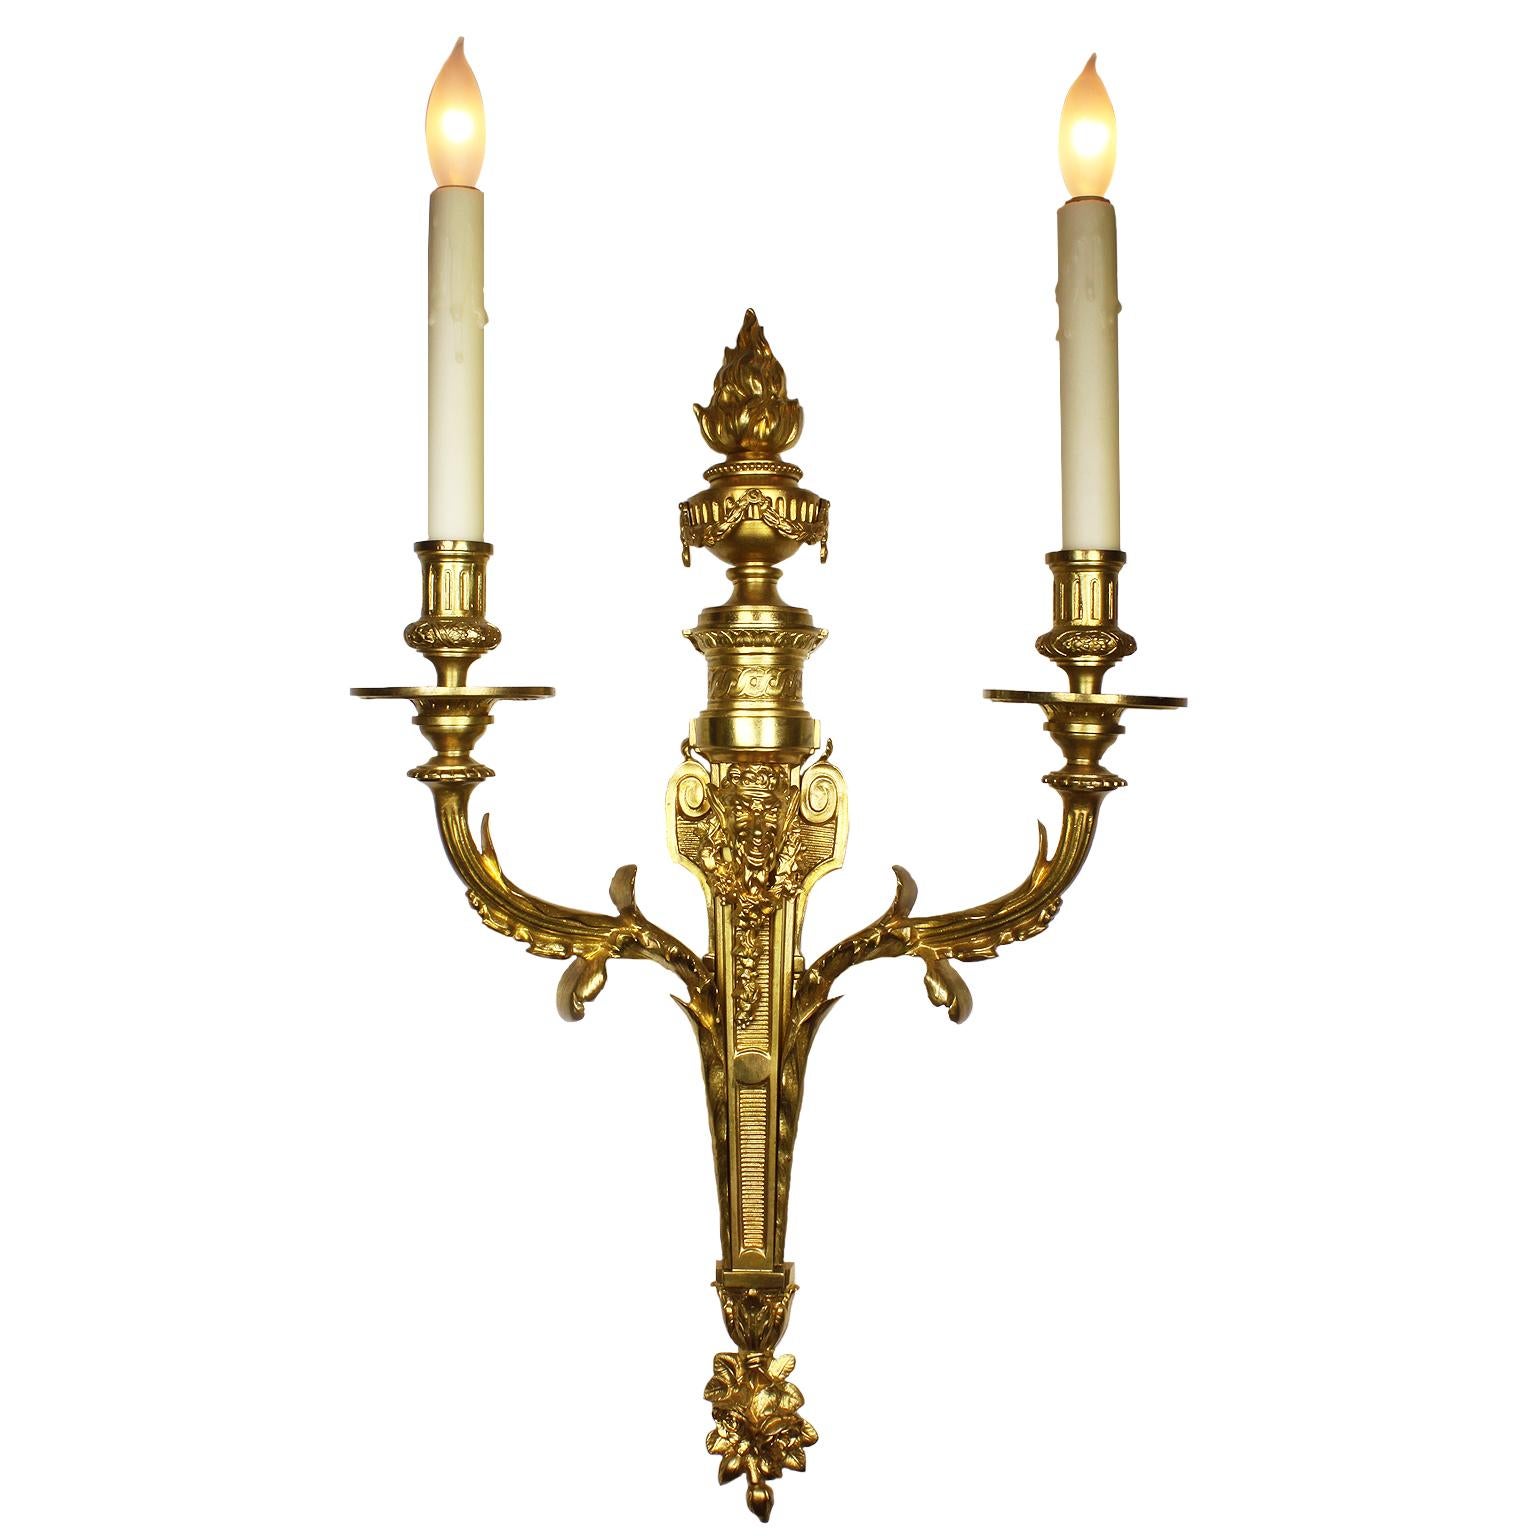 A fine pair of French 19th century Louis XV style gilt-bronze two-light wall light sconces. The slender tapered body surmounted with a mask figure of Bacchus above a pair of scrolled candle-arms and crowned with a flambeaux urn with a burning flame,